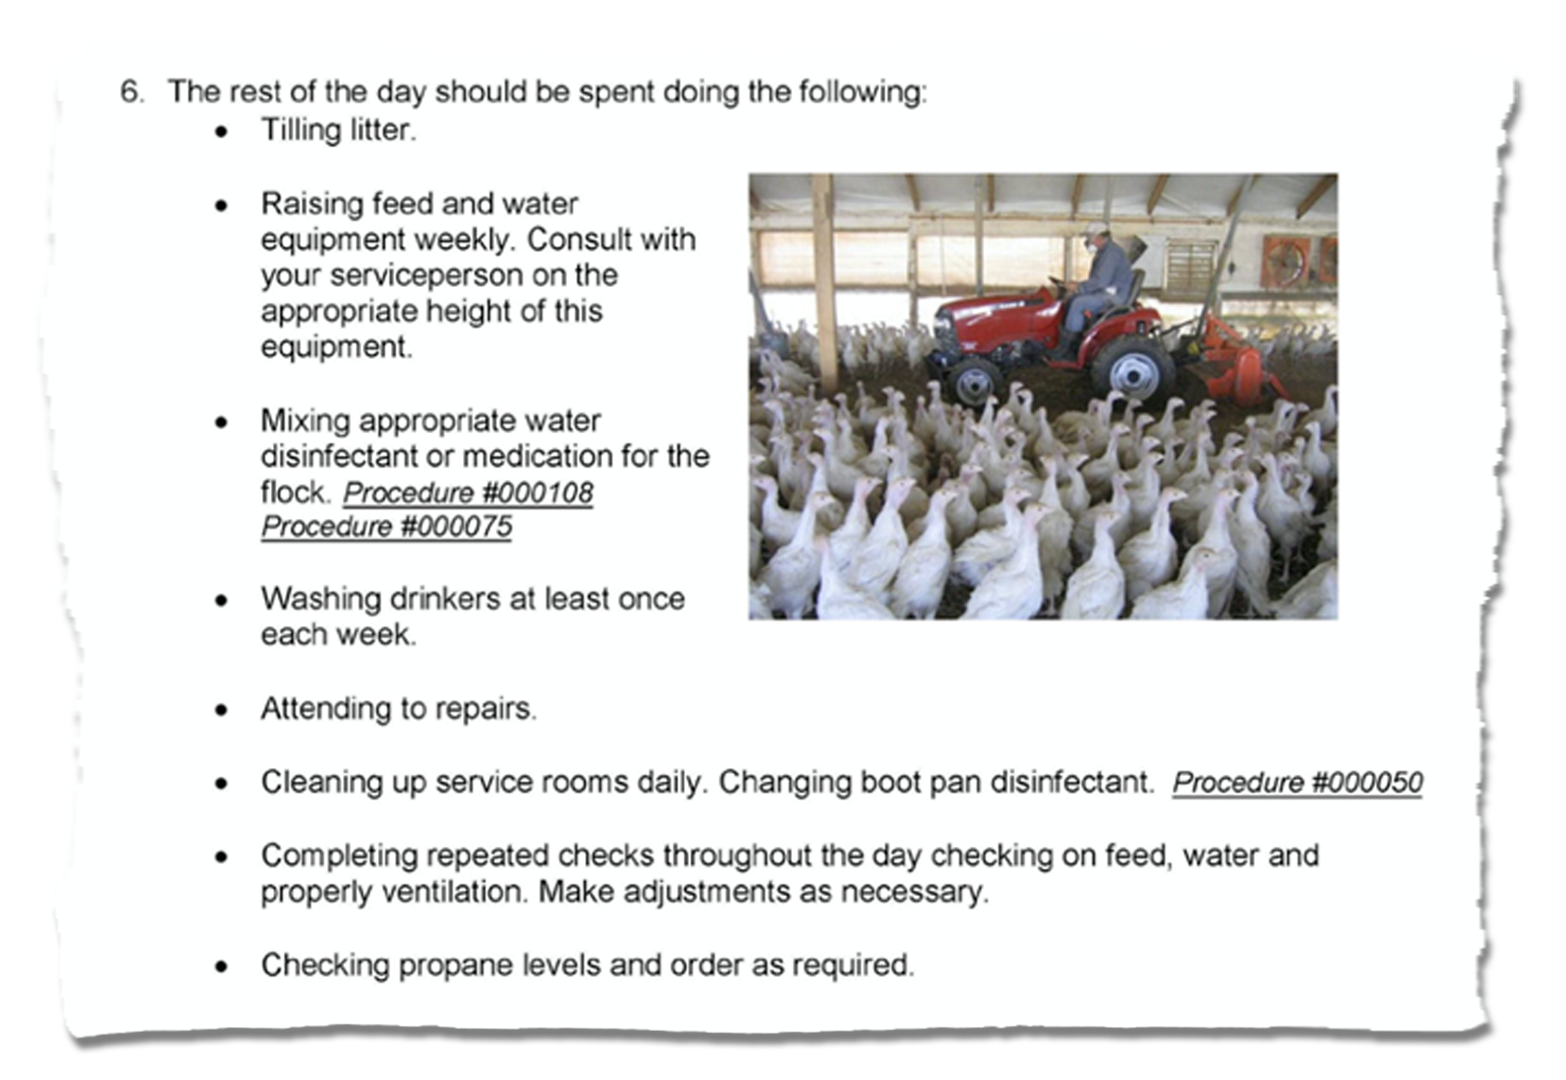 A slide detailing turkey production procedures, including "mixing appropriate water disinfectant or medication for the flock." The right hand side of the slide includes a photo of a person riding a tractor among a significant number of turkeys in a shelter where they are raised.